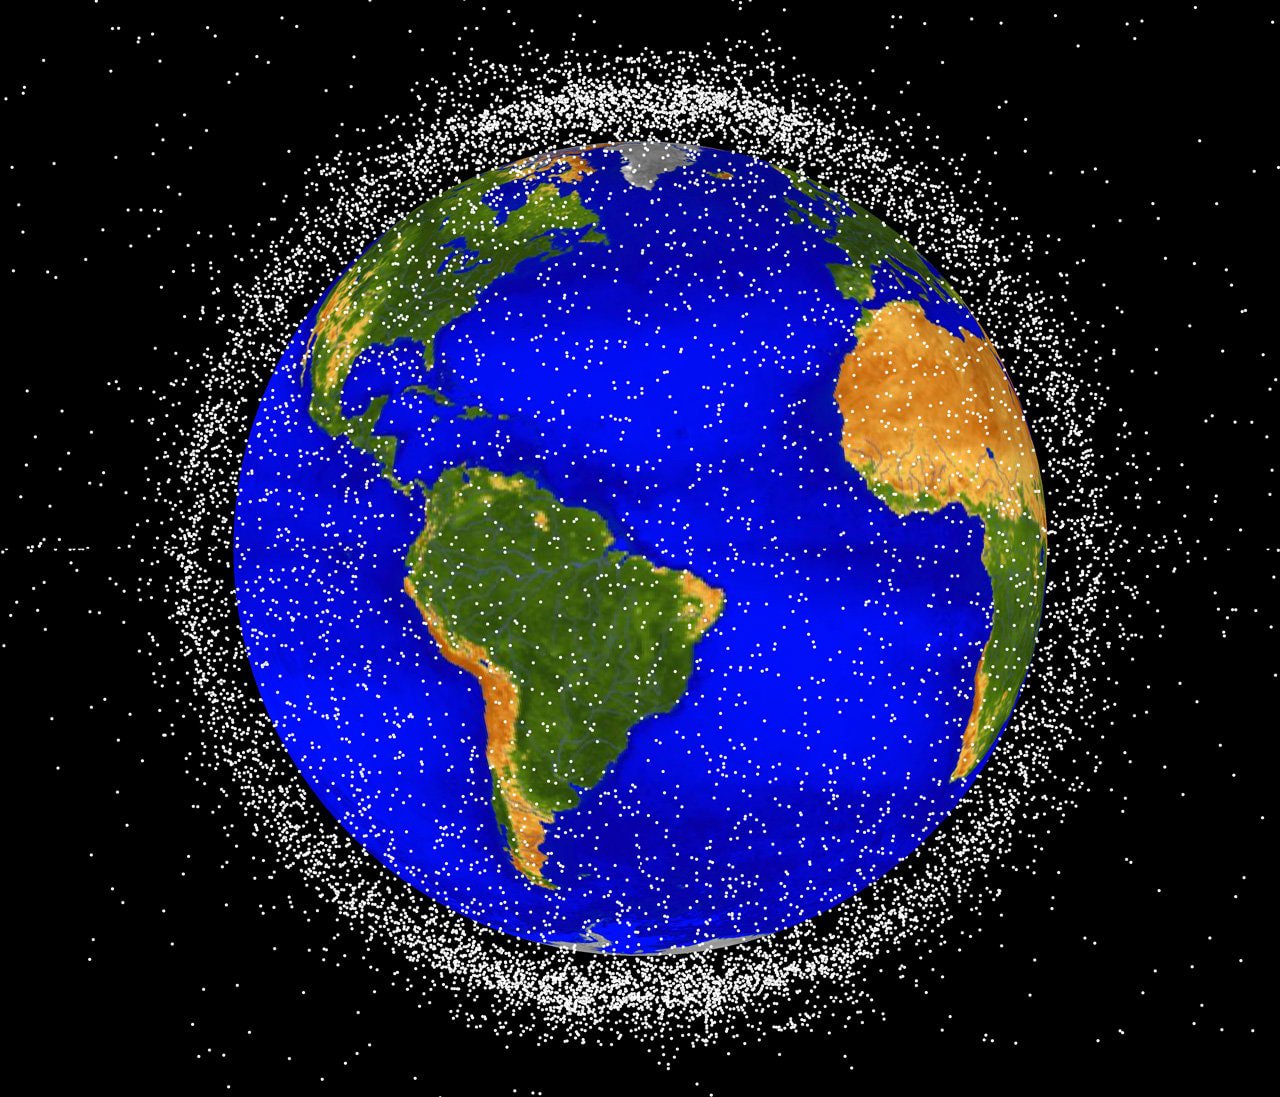 Graphic of Space Junk